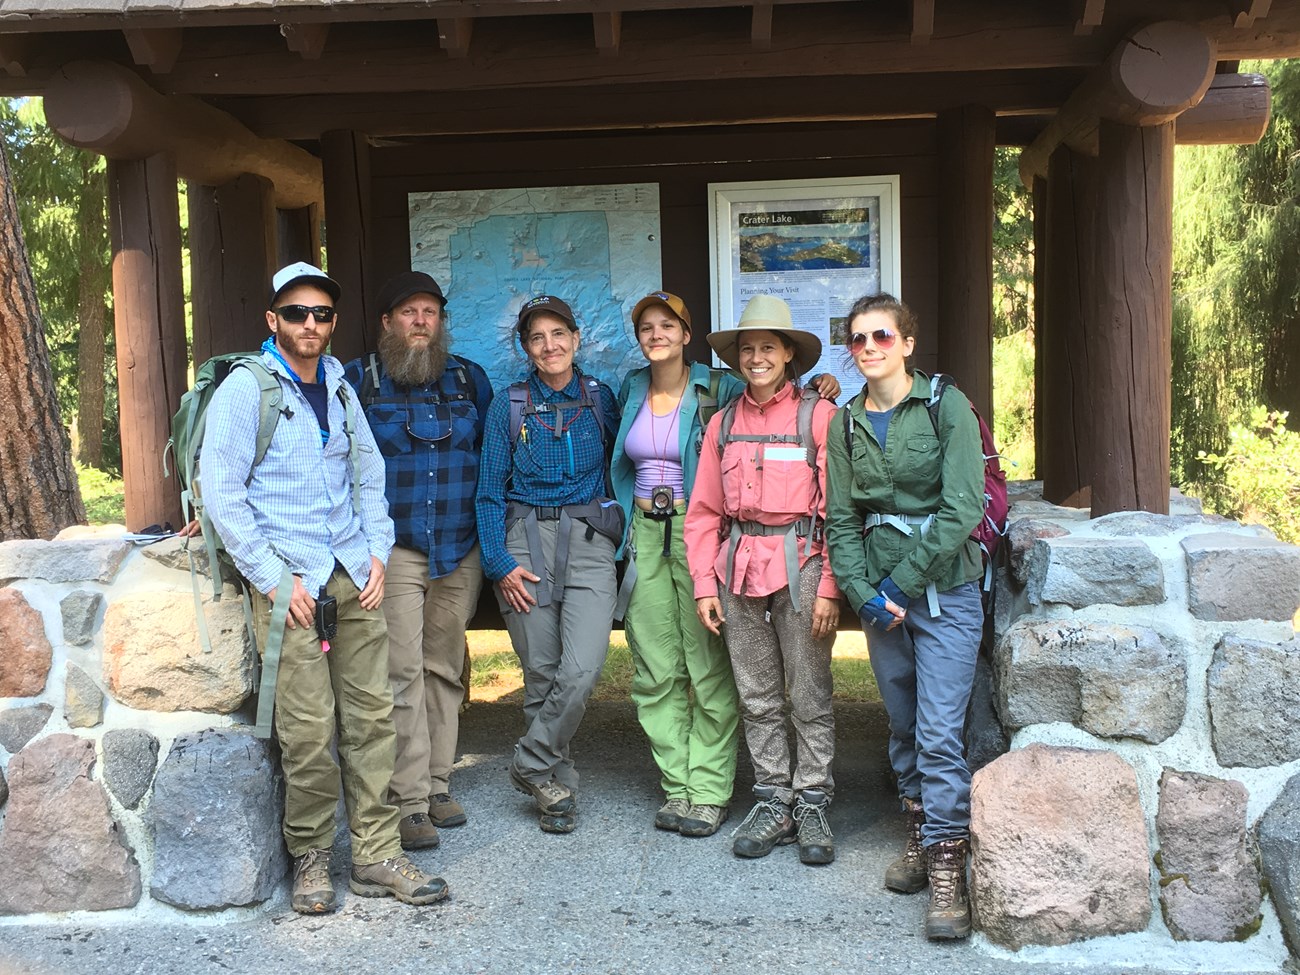 Six people wearing backpacks and hiking boots pose for a photo before an outdoor map of Crater Lake.